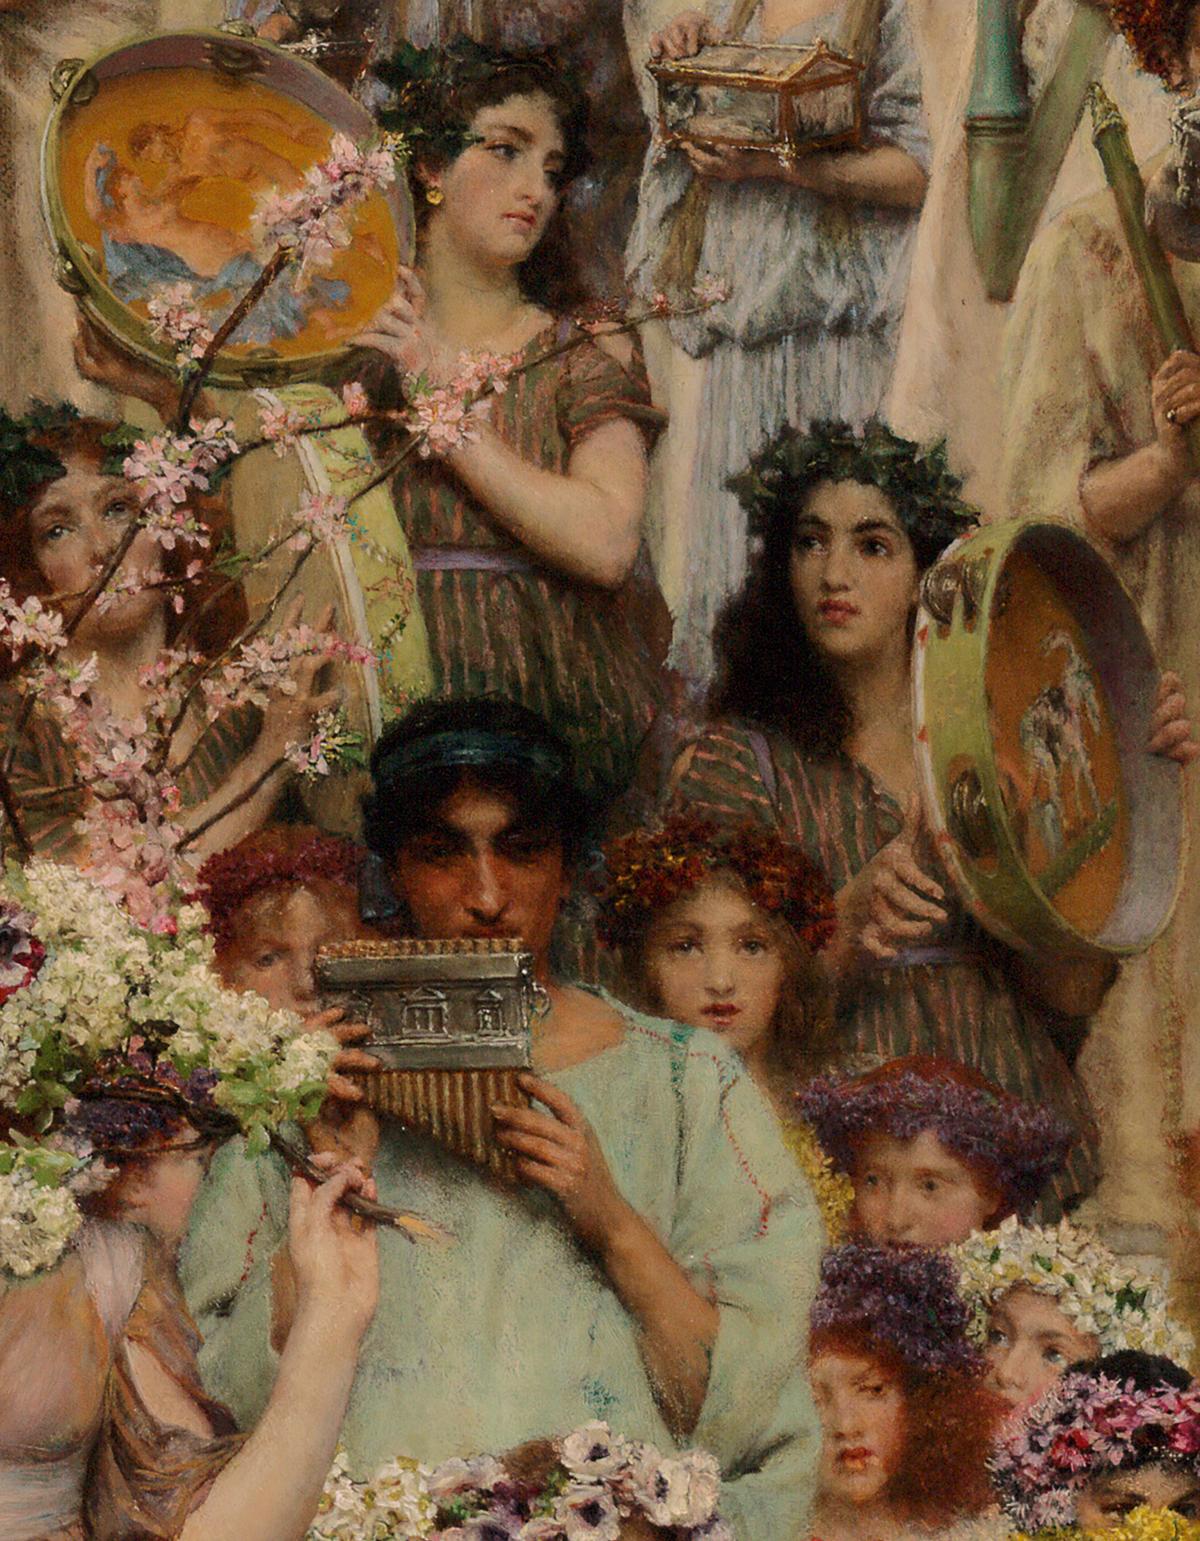 Closeup of pan flute player and women holding tambourines decorated with satyrs and maenads from Alma Tadema's "Spring."